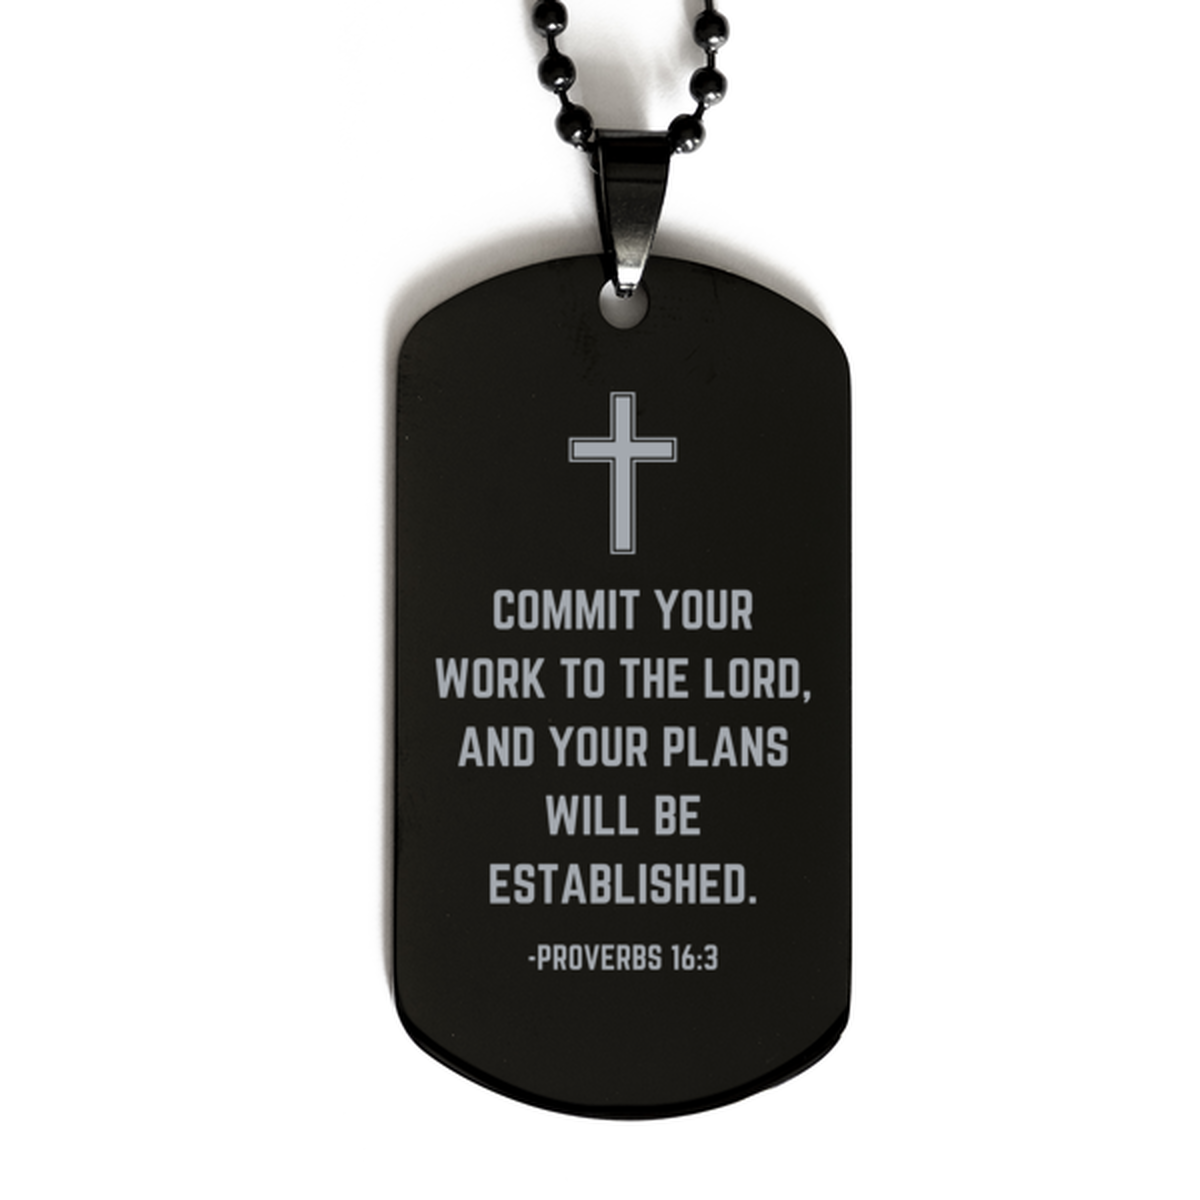 Baptism Gifts For Teenage Boys Girls, Christian Bible Verse Black Dog Tag, Commit your work to the Lord, Confirmation Gifts, Bible Verse Necklace for Son, Godson, Grandson, Nephew